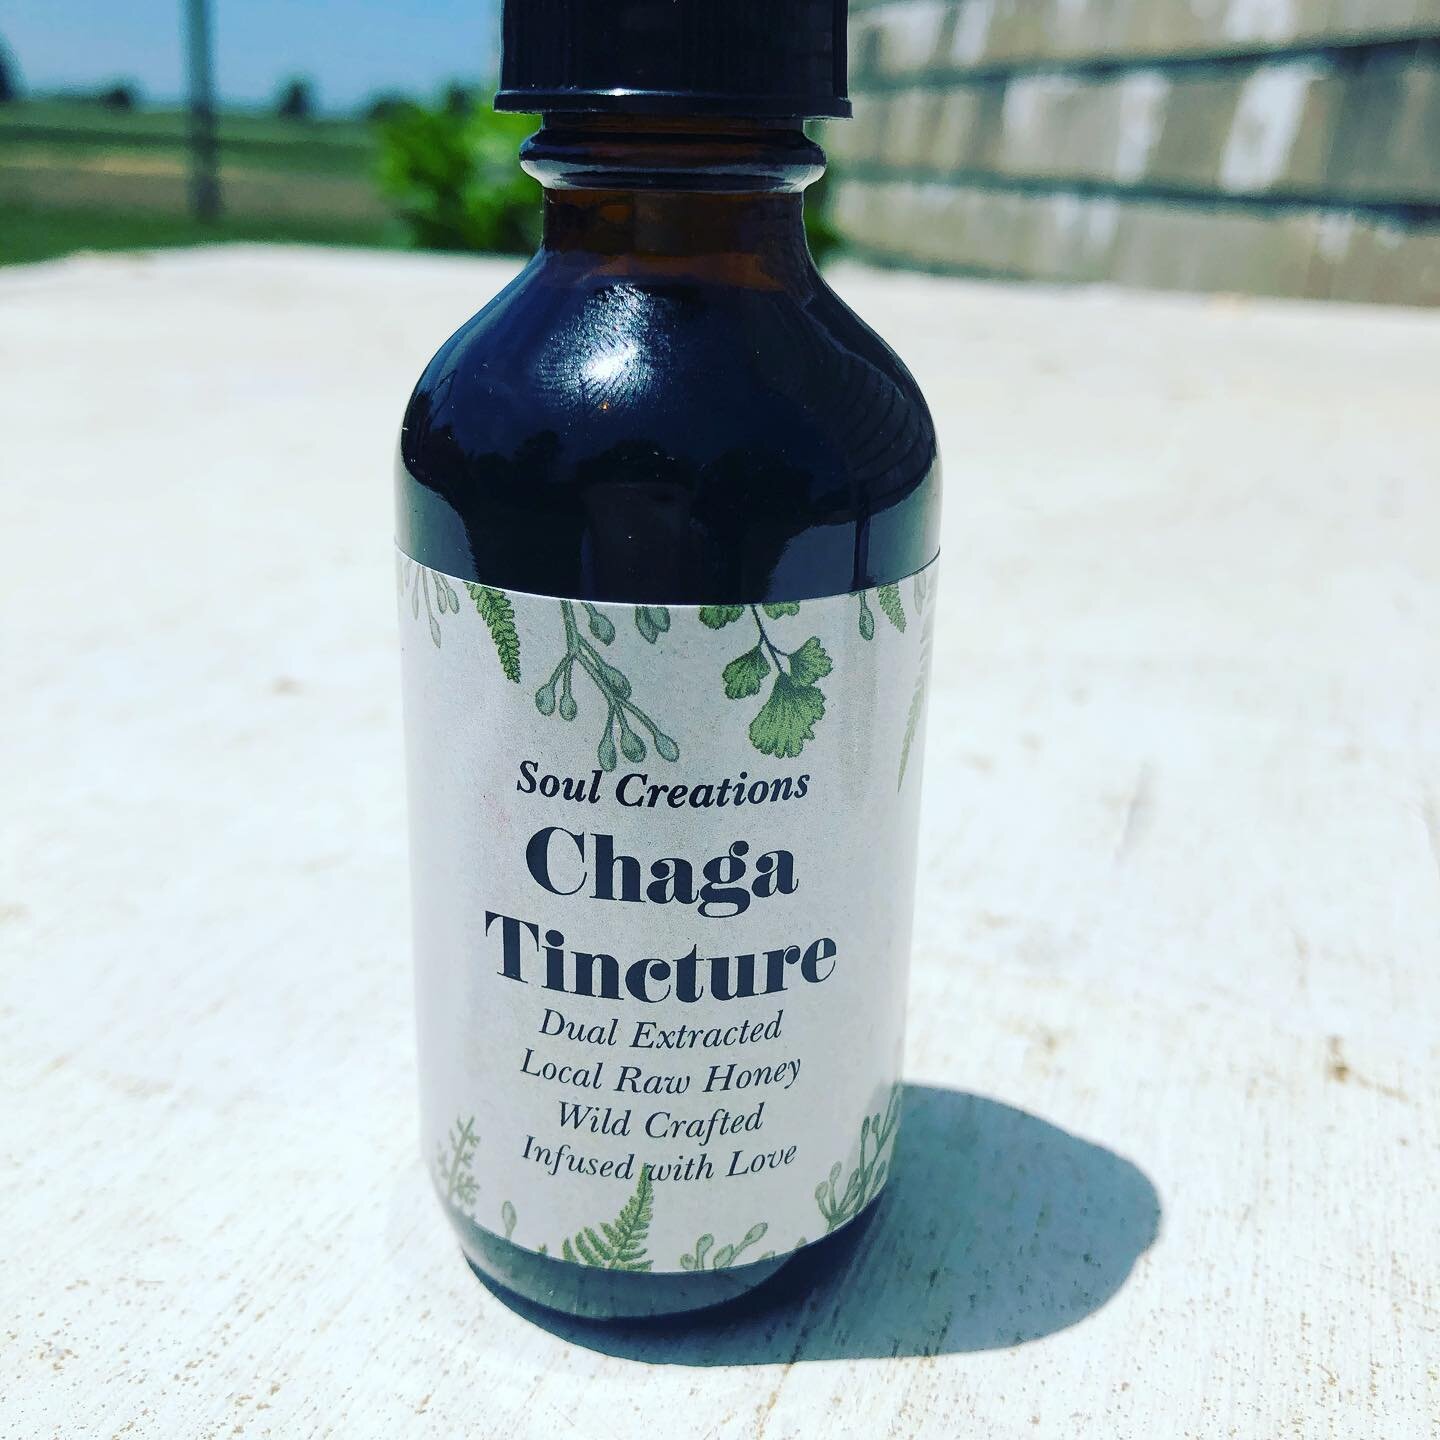 Handcrafted Chaga Tincture.
Swipe for more information!
Grateful to share this medicine that was made with Chaga harvested by the hands of good friends.
Chaga is adaptogenic, stimulating to the immune system and a wonderful ally to have during stress